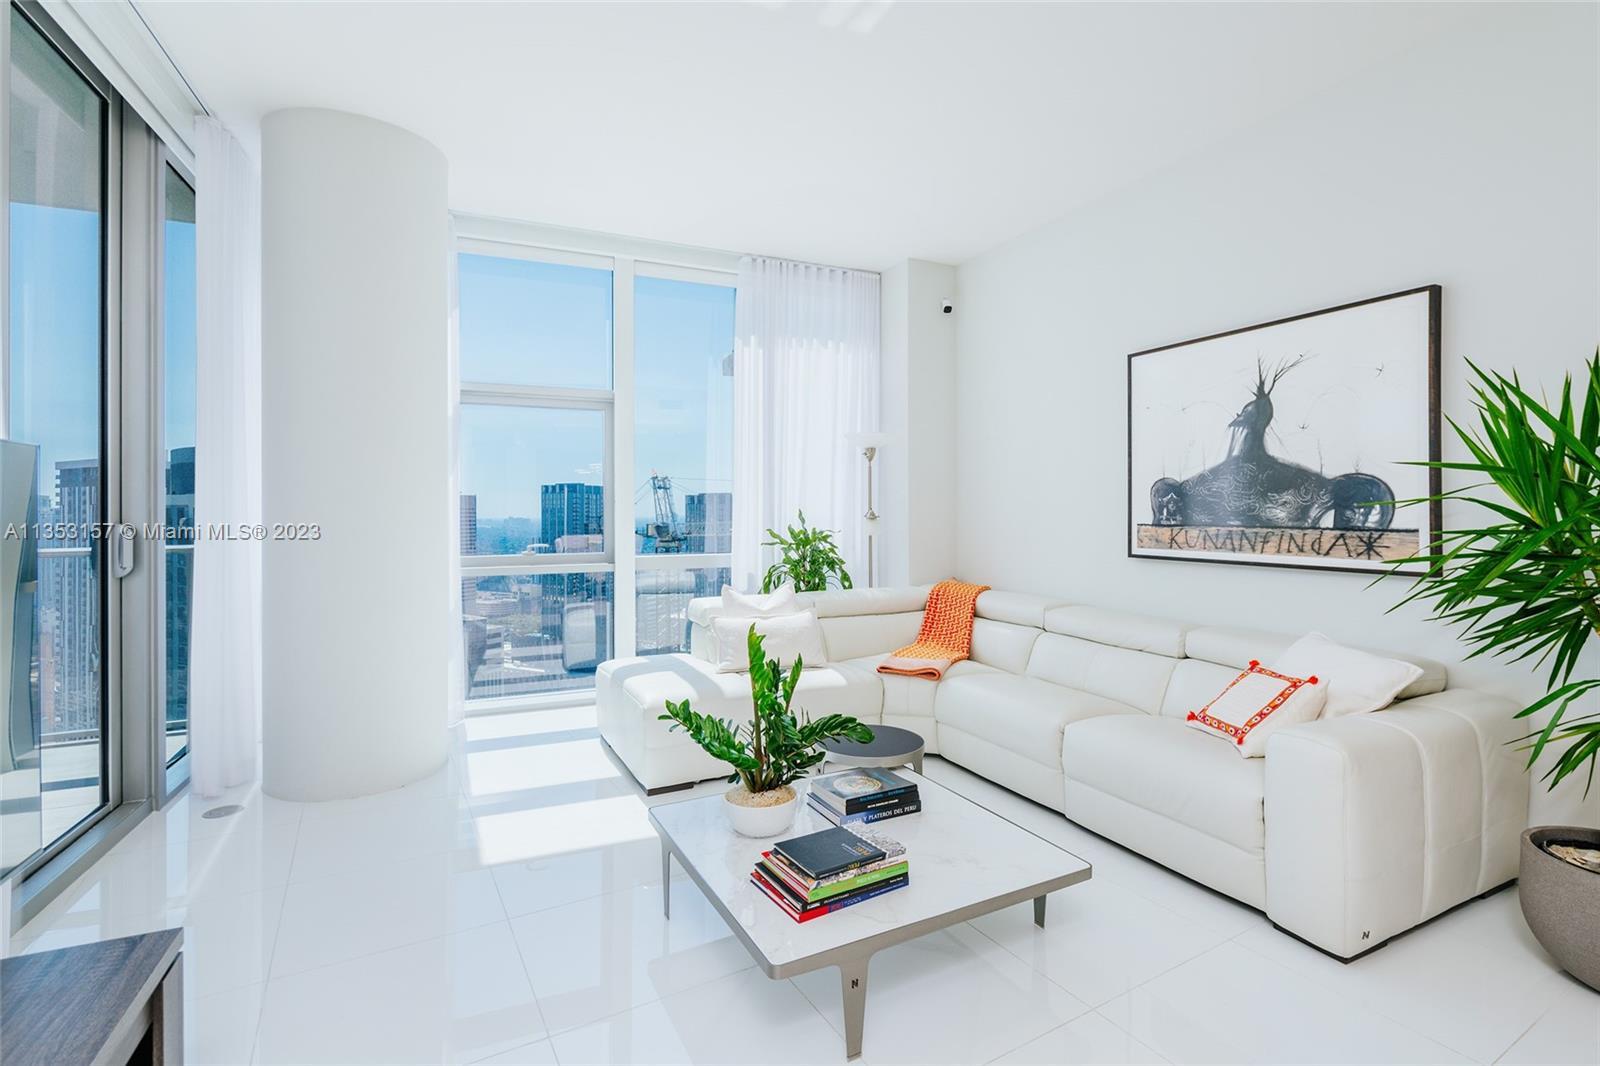 Paramount Miami Worldcenter is a luxury building with the most amenities in the world in the heart o